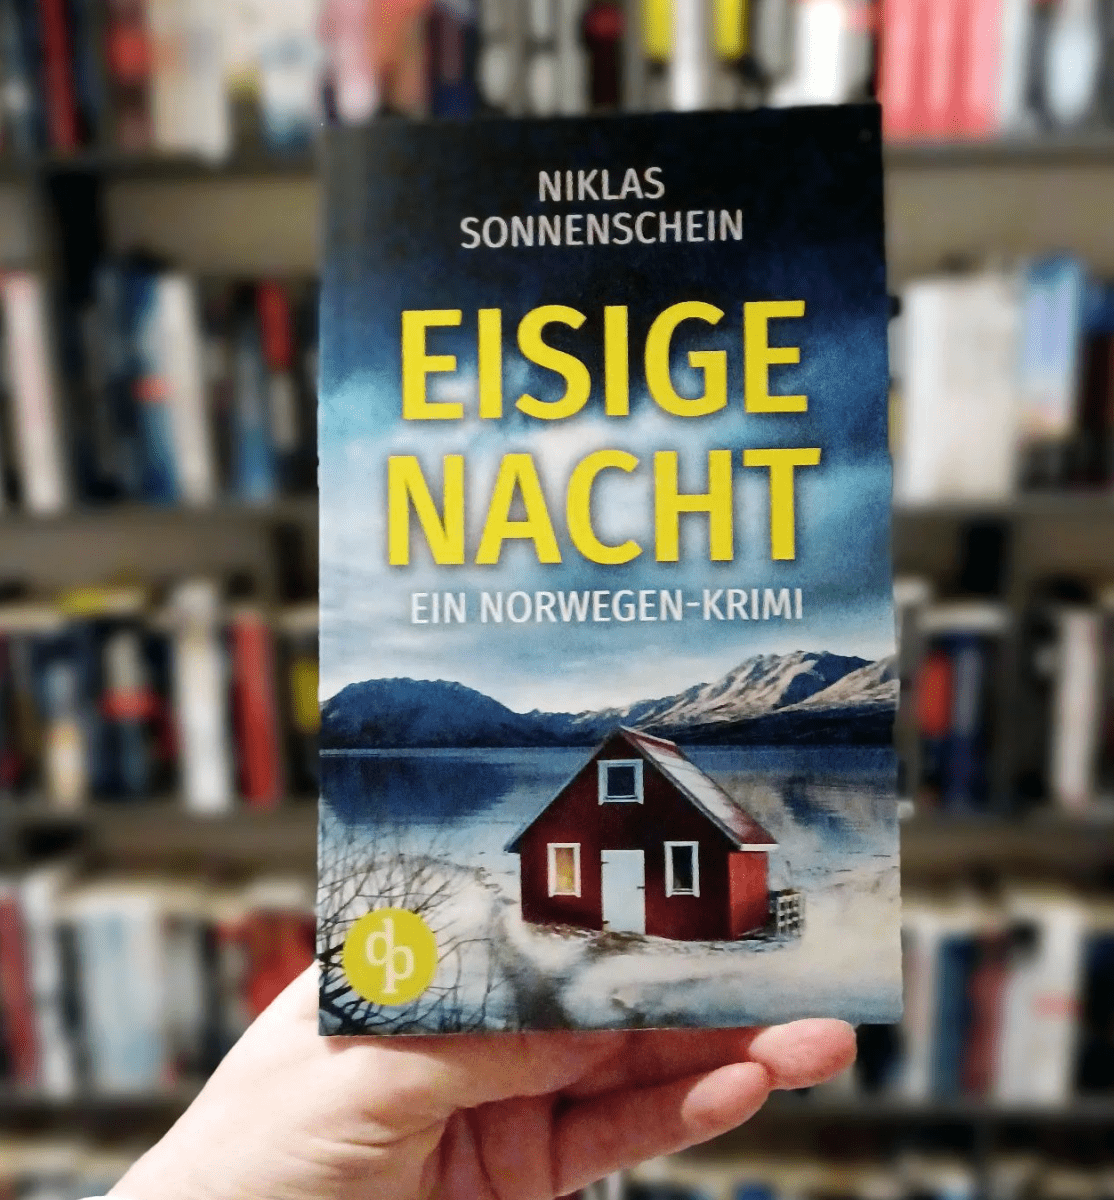 You are currently viewing Eisige Nacht (Niklas Sonnenschein)